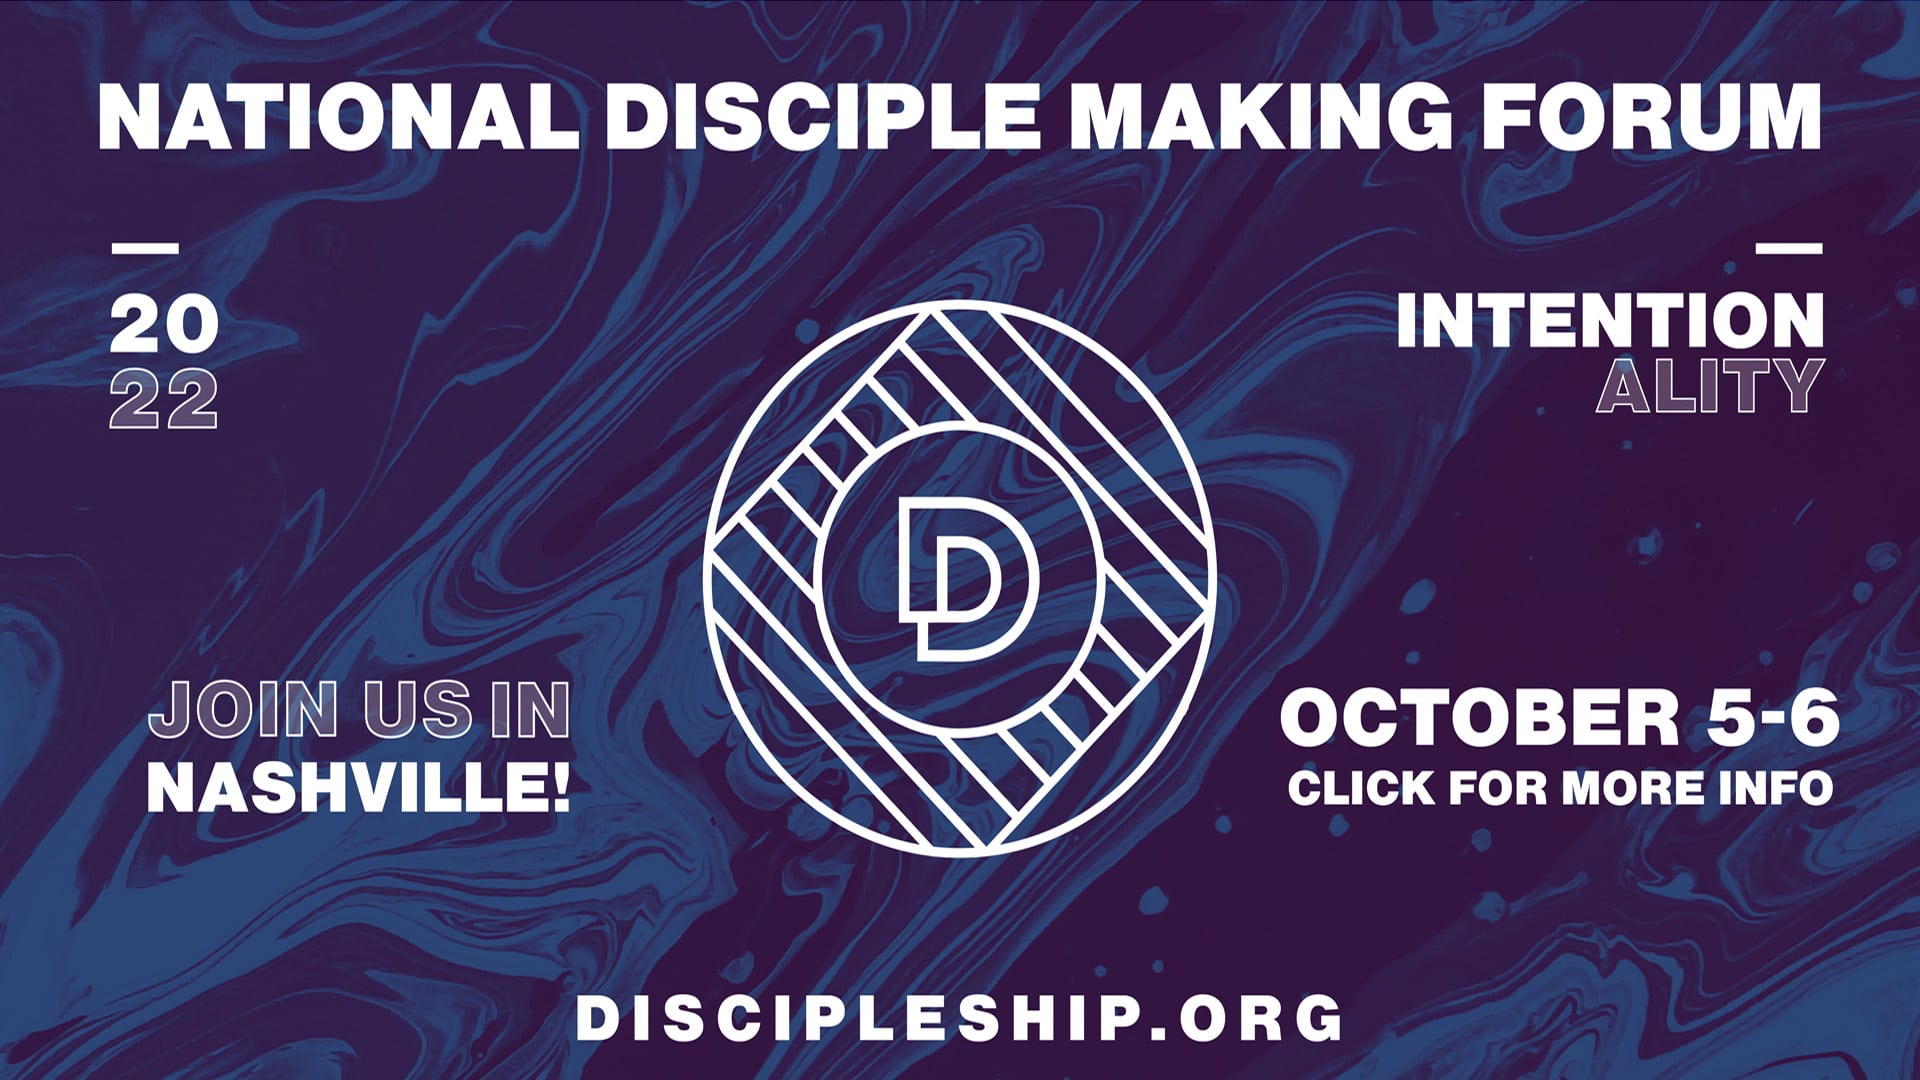 2022 National Disciple Making Forum Robby Gallaty